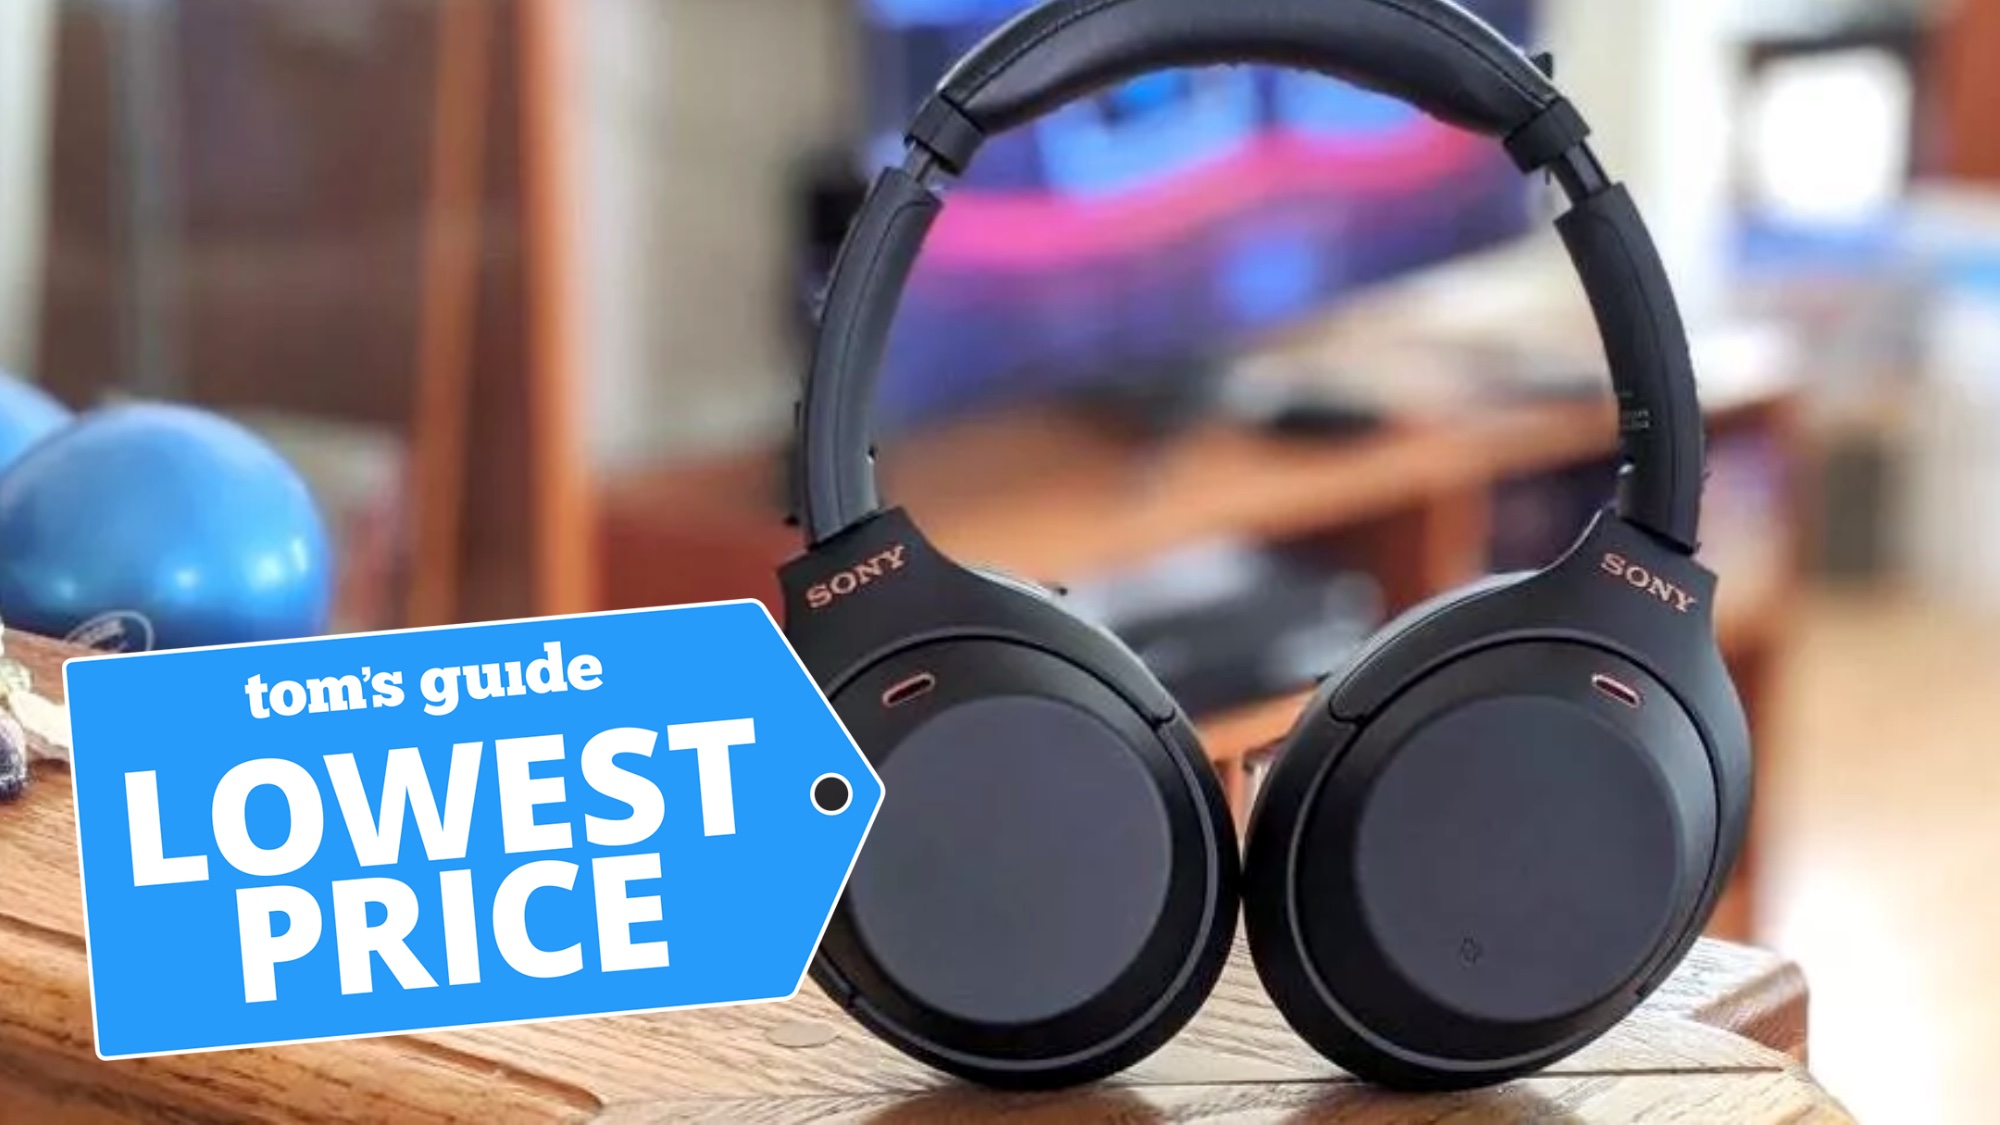 Sony WH-1000XM4 headphones just crashed to lowest price ever